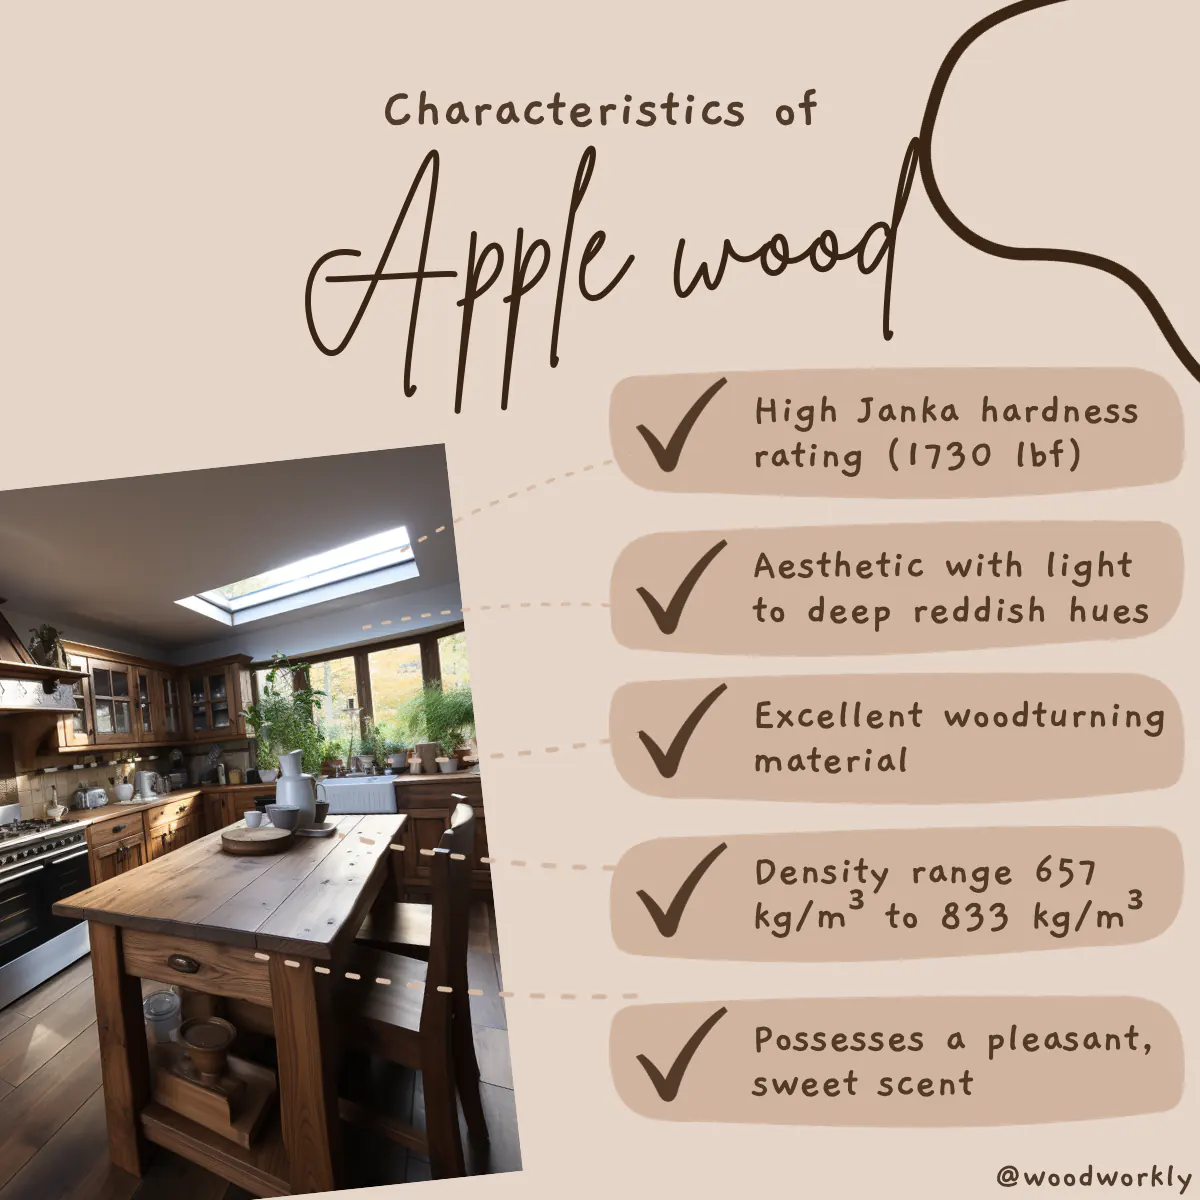 Characteristic features of apple wood